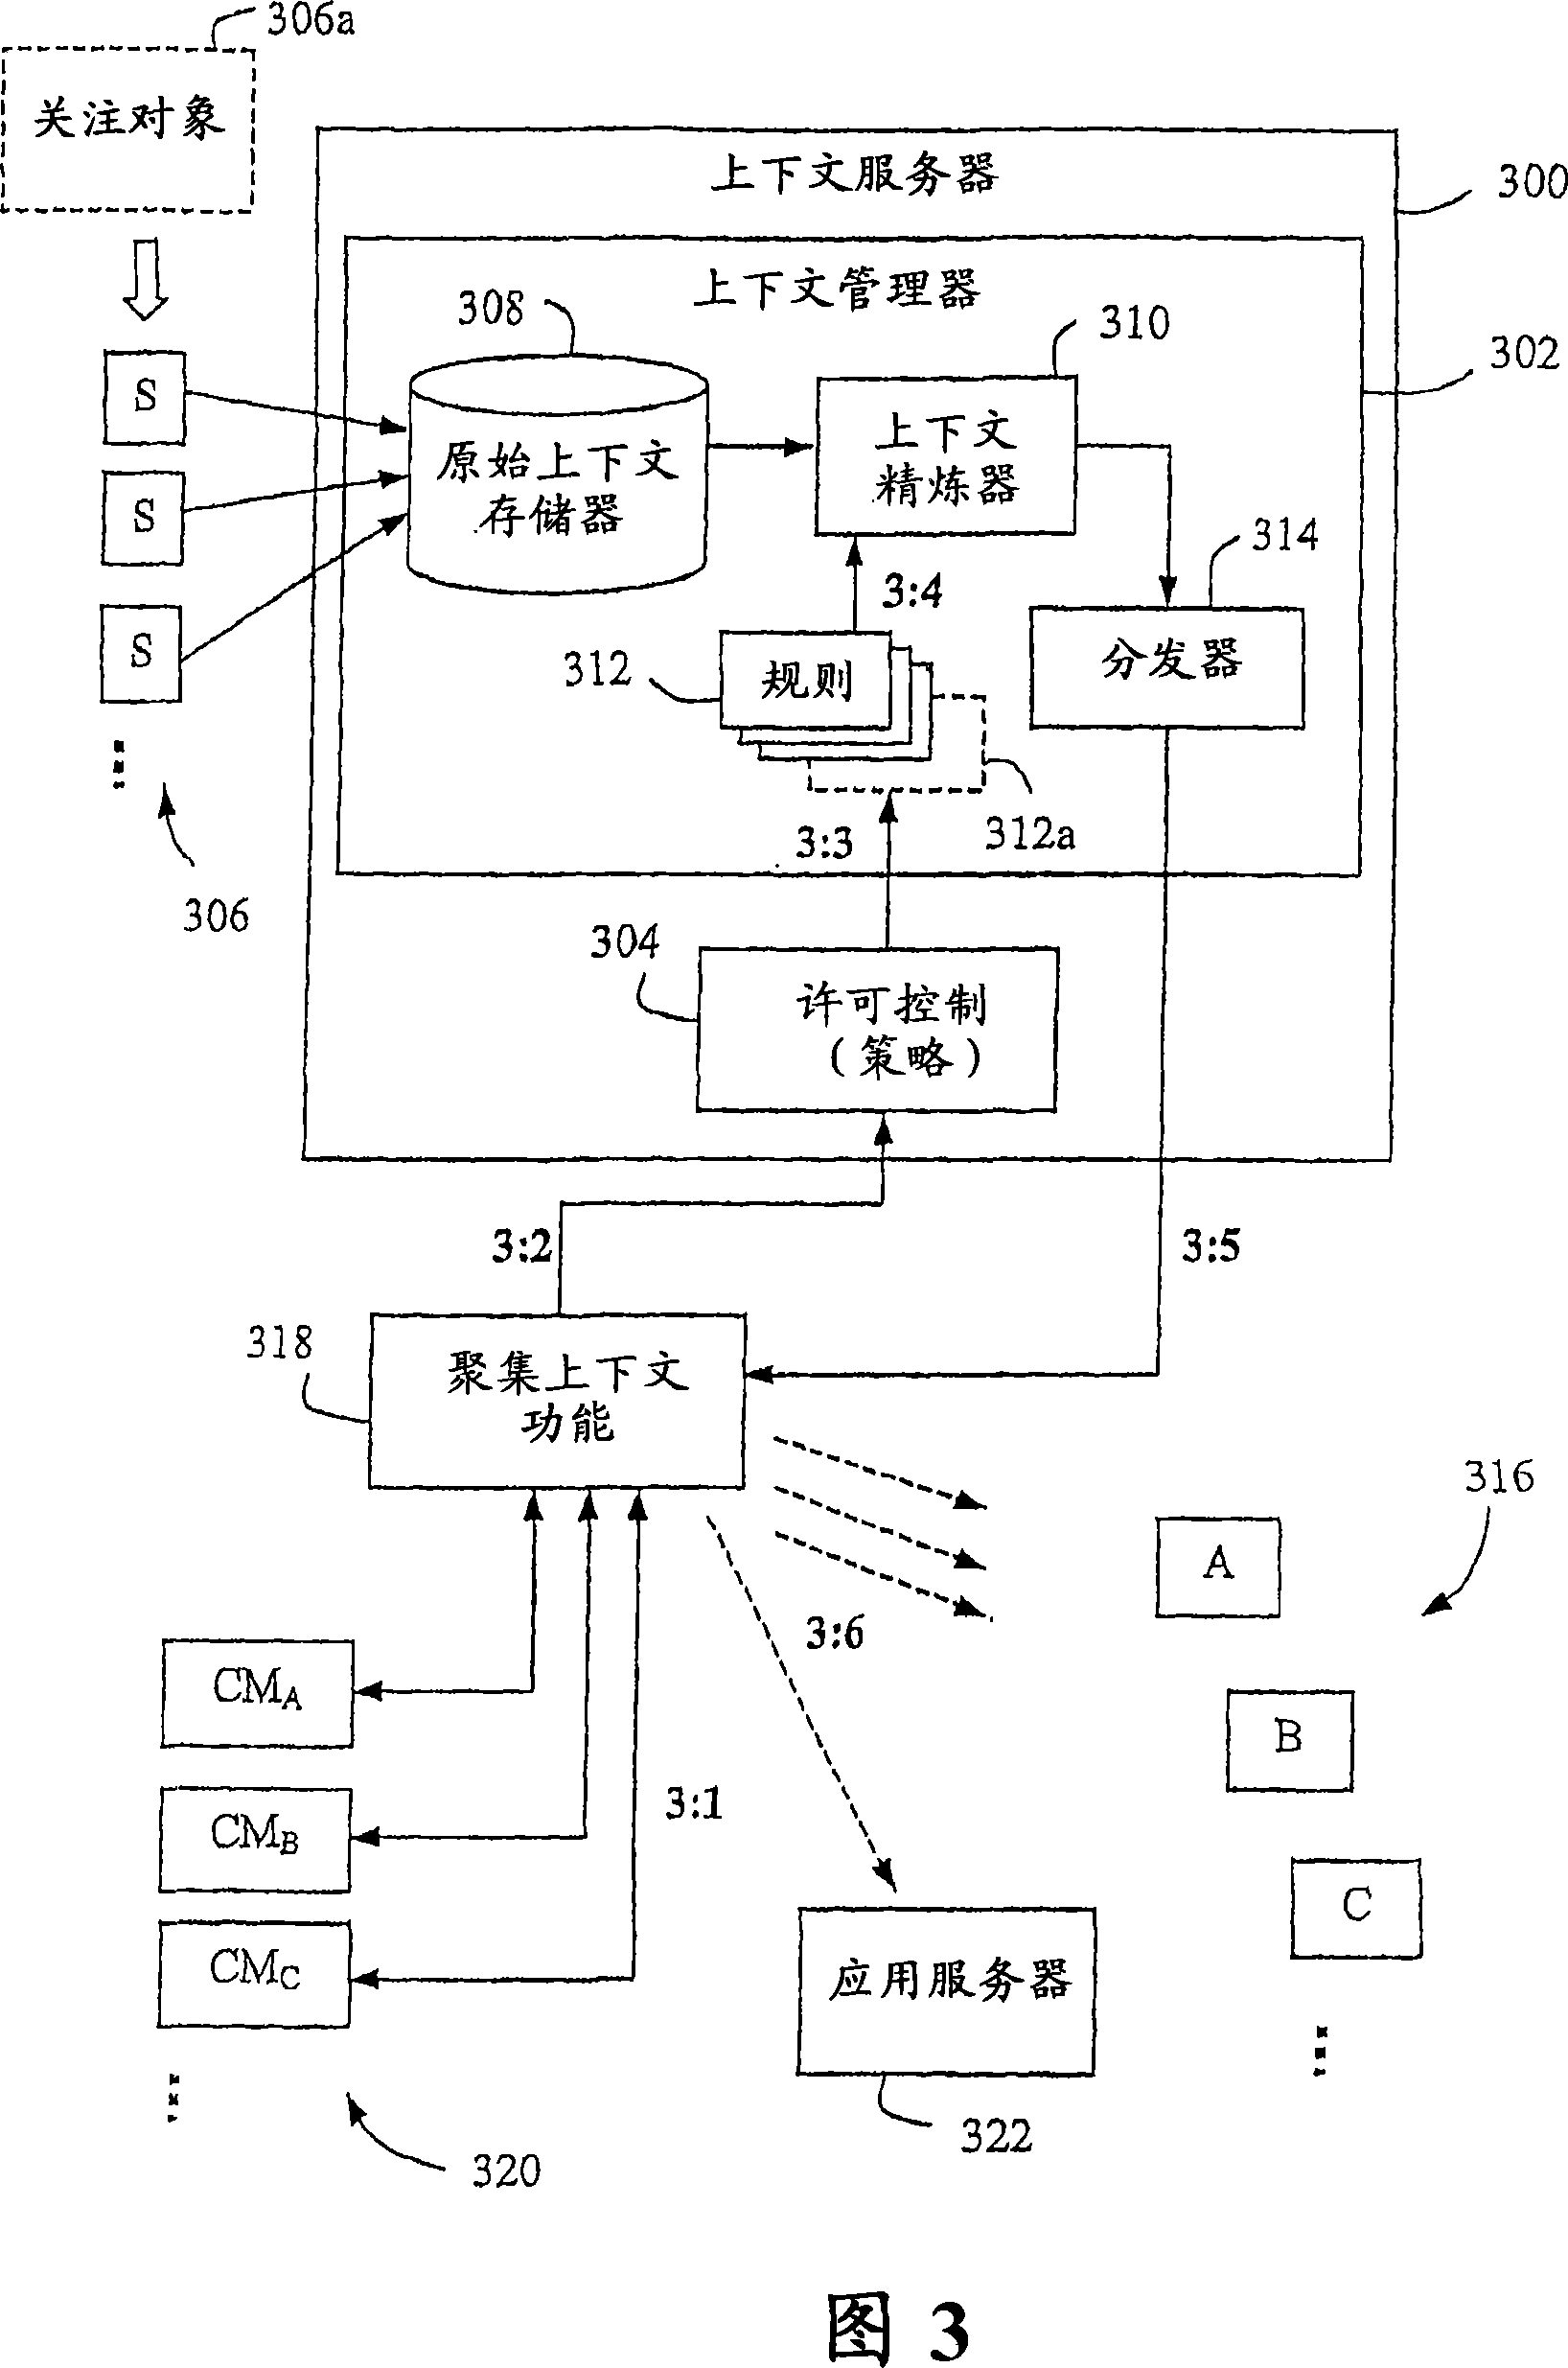 A method and arrangement for providing context information